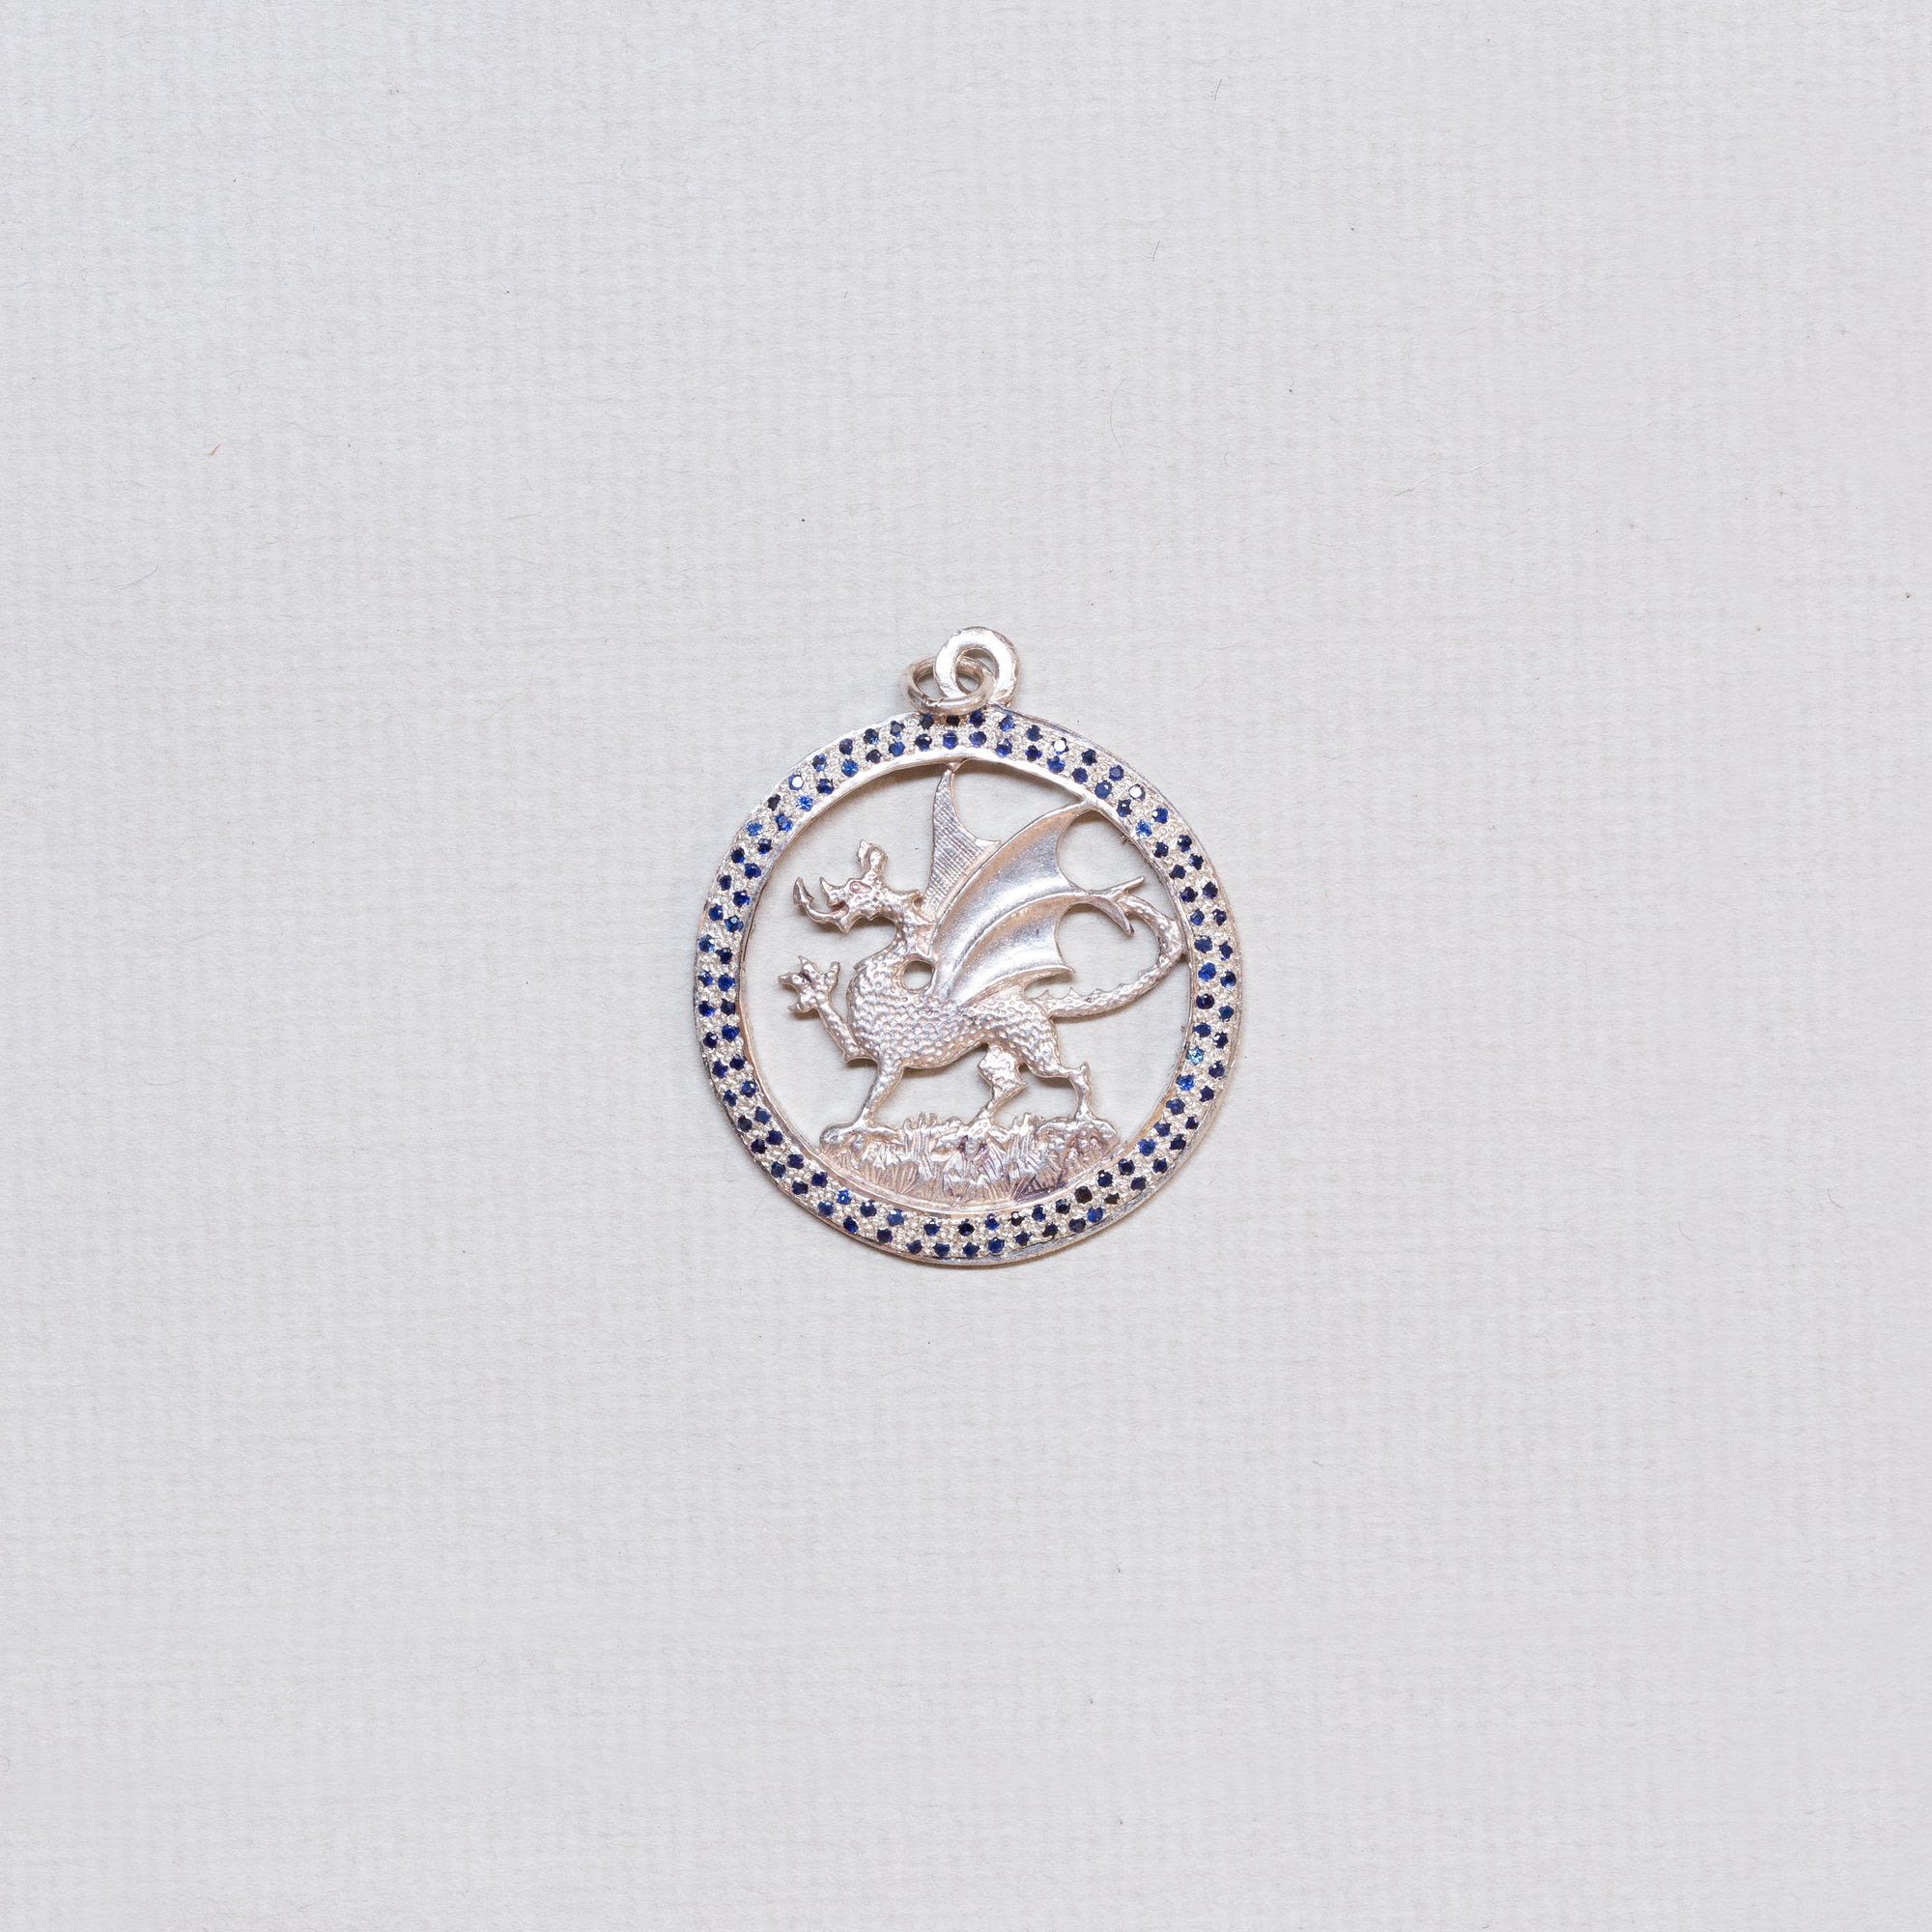 Vintage Sterling Silver Dragon Charm Pendant with Sapphires